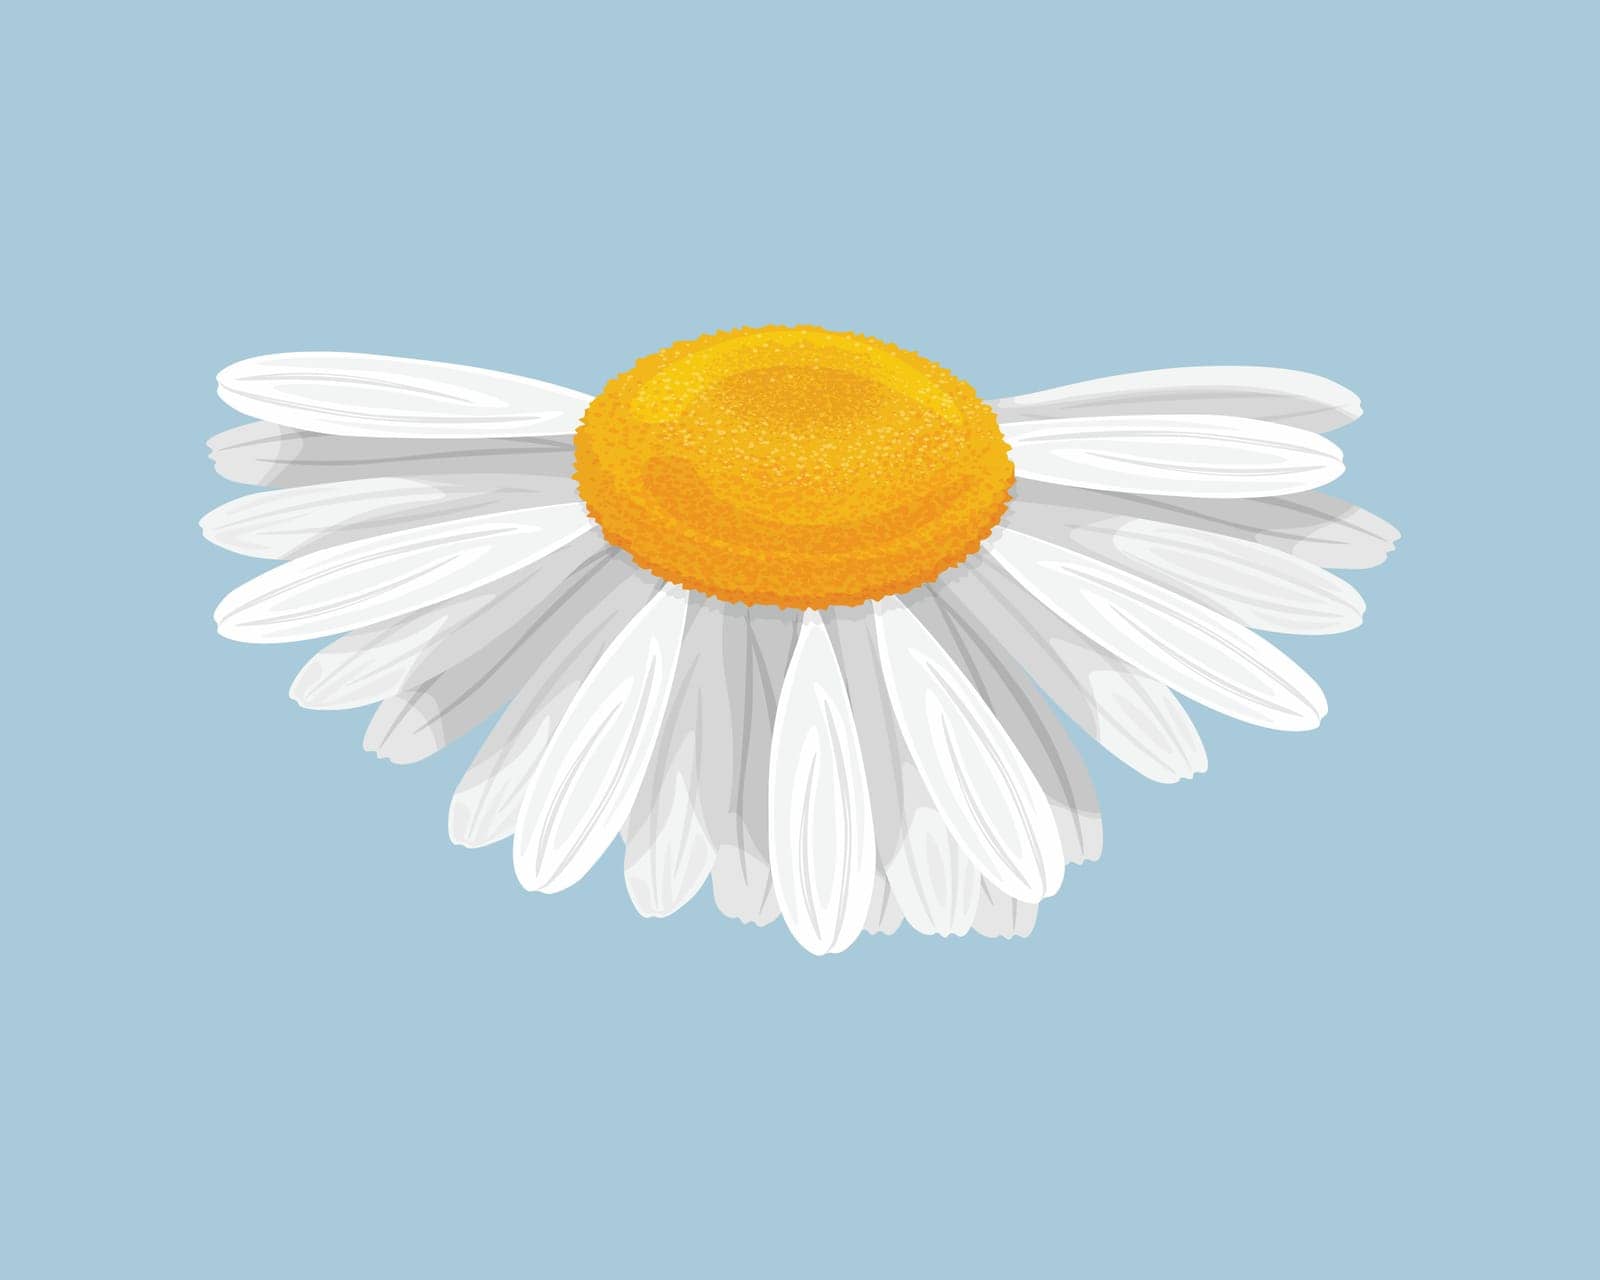 Chamomile. A white daisy flower on a yellow background. A bright wildflower. Vector illustration.